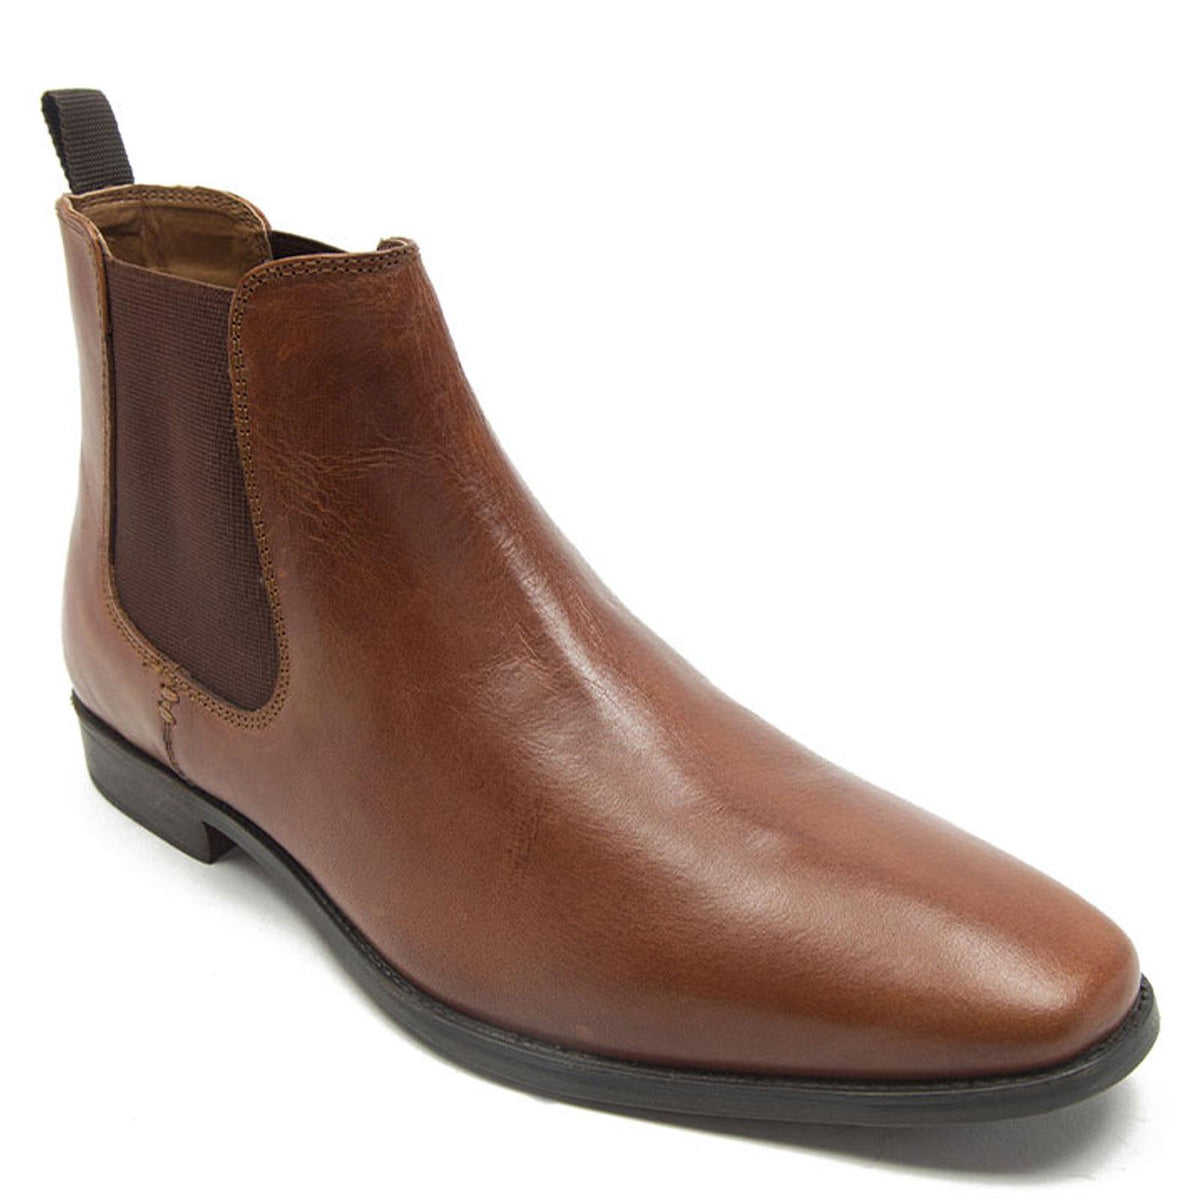 Thomas Crick Addison Men's Leather Pull On Chelsea Boots